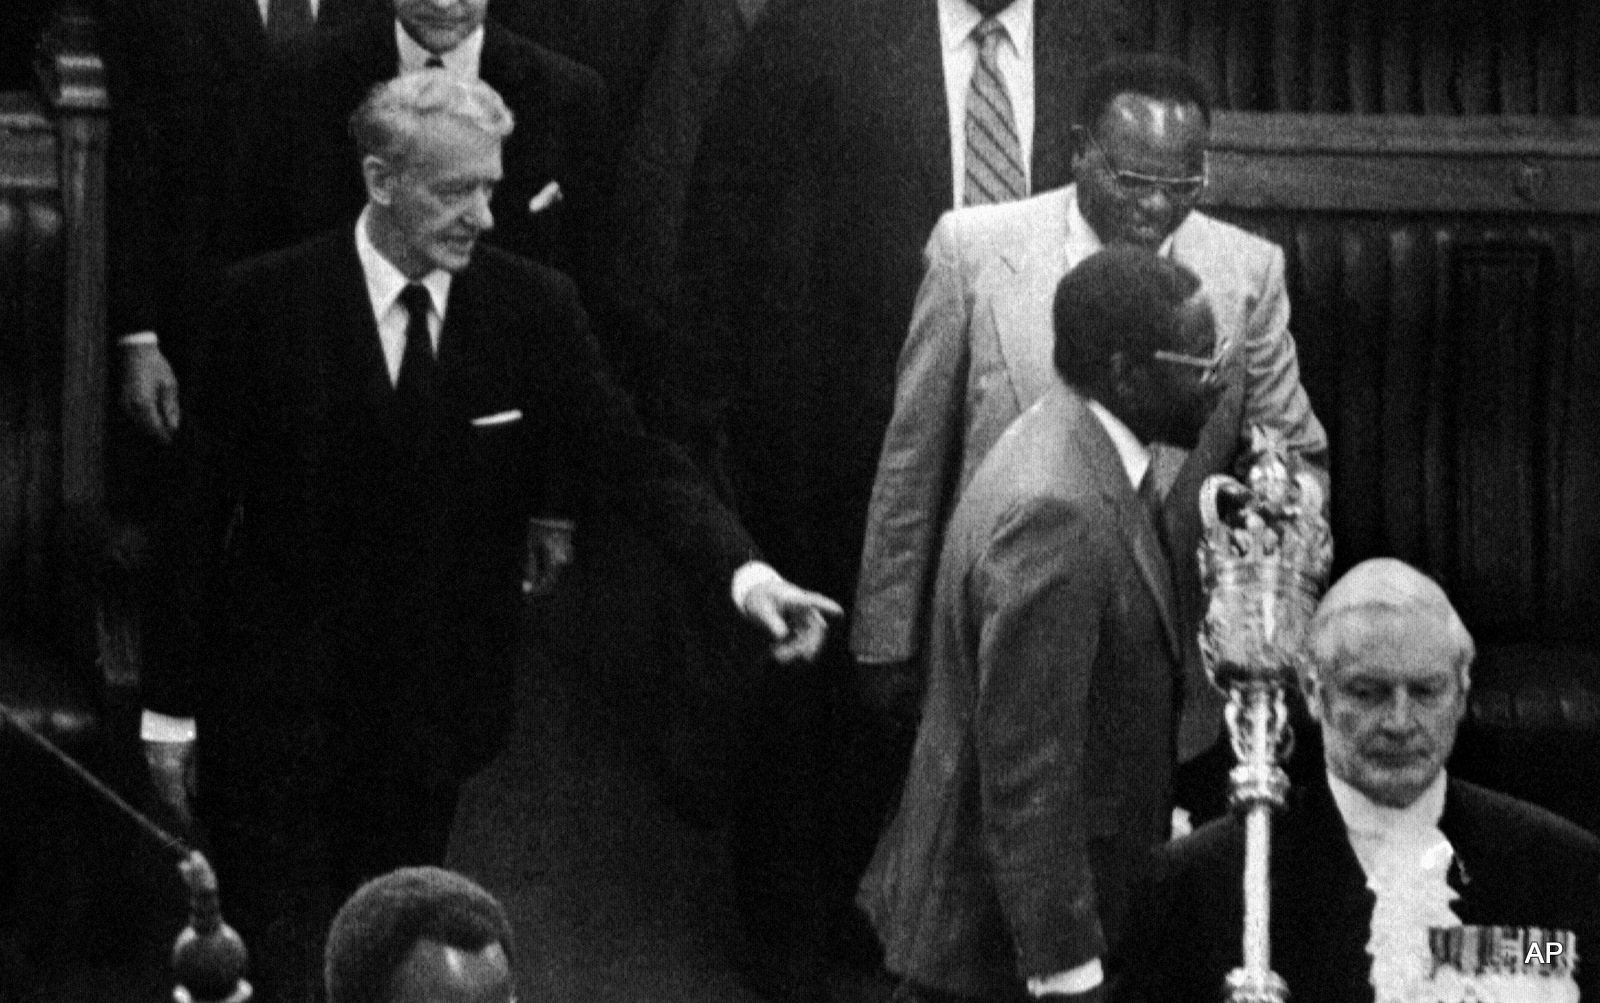 At the opening of first Parliament of independent Zimbabwe, former Premier Ian Smith, points out to newly elected Prime Minister Robert Mugabe the way to the Premier’s seat, in Salisbury, Zimbabwe, on May 14, 1980. Among black Parliamentarians (all Ministers) following Mugabe are Vice Premier Simon Musenda (smiling) and Nationalist Veteran Leader Joshua Nkomo. 